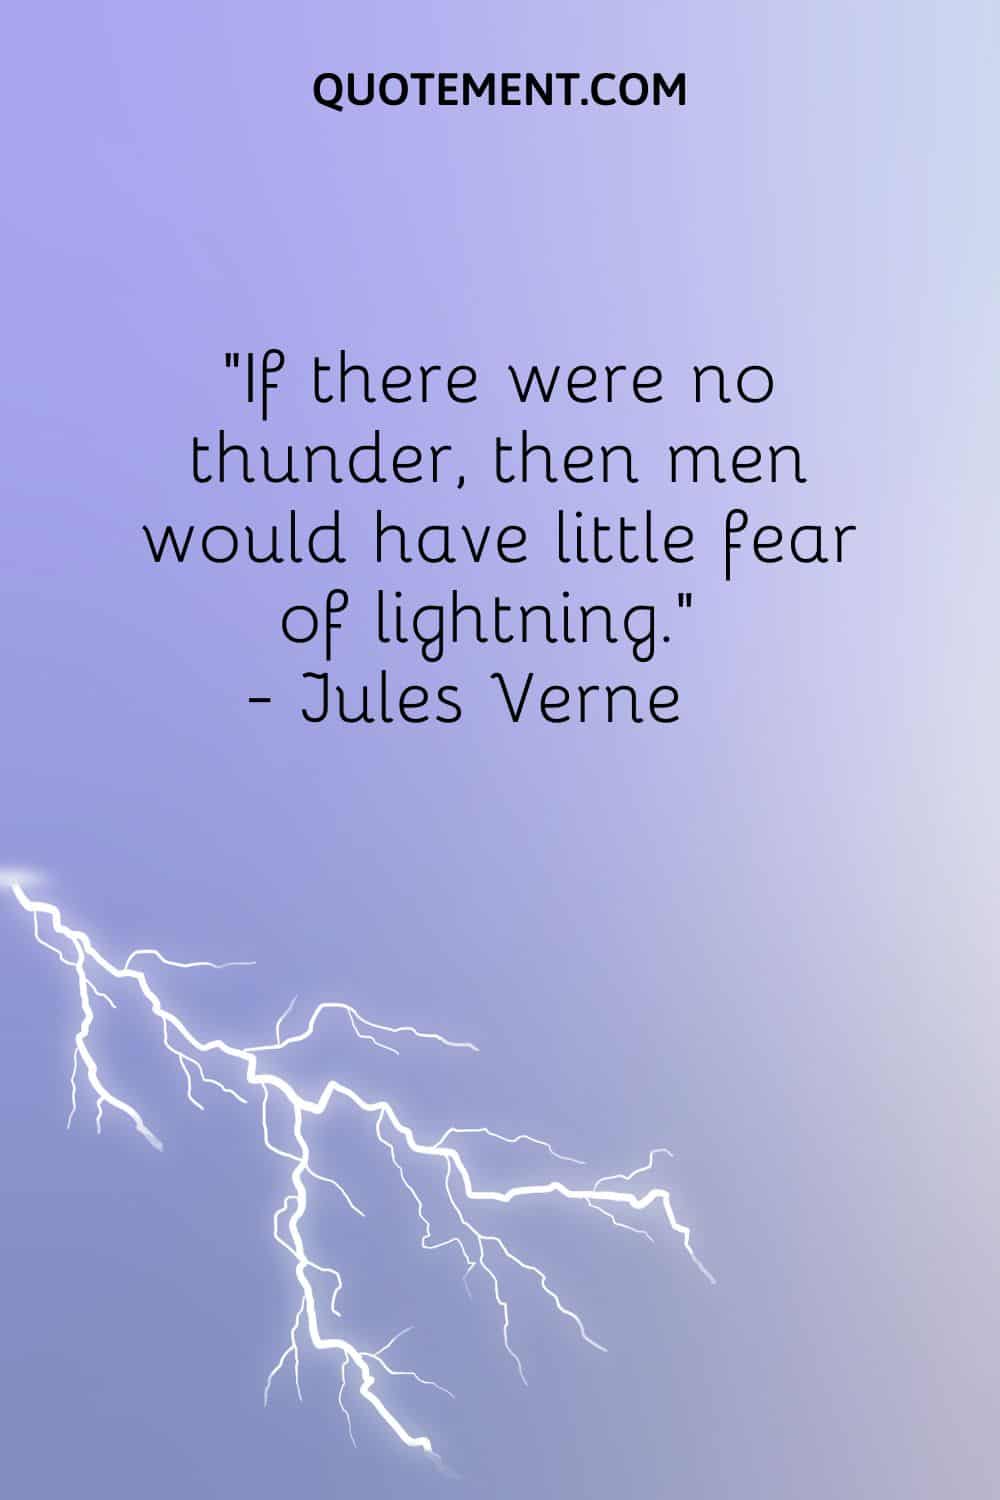 image of lightning representing quote about thunder